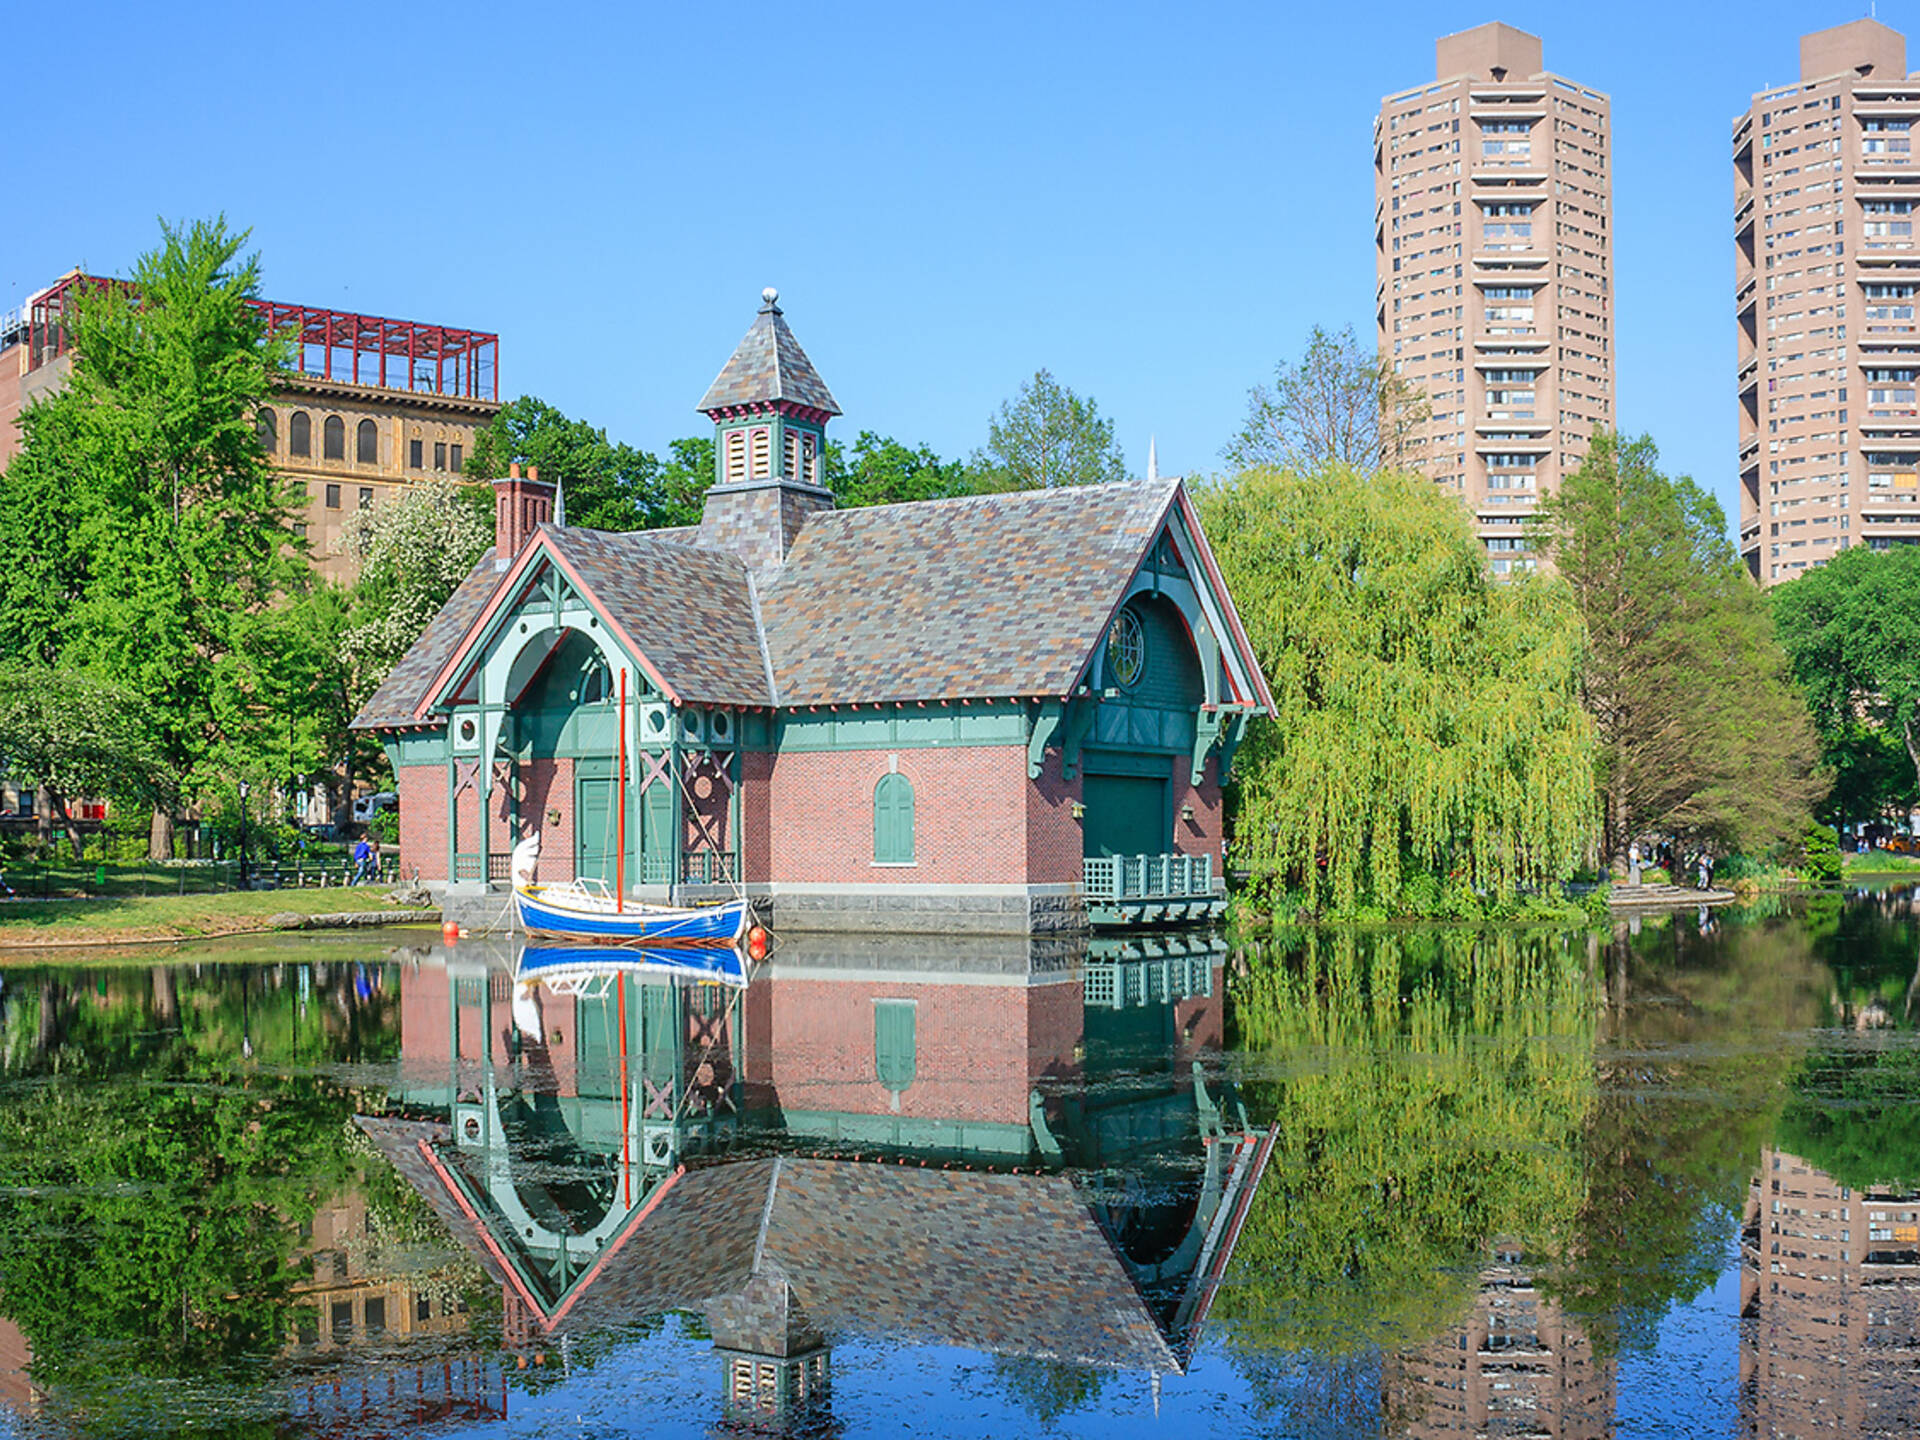 Central park in summer, see all the beautiful photos